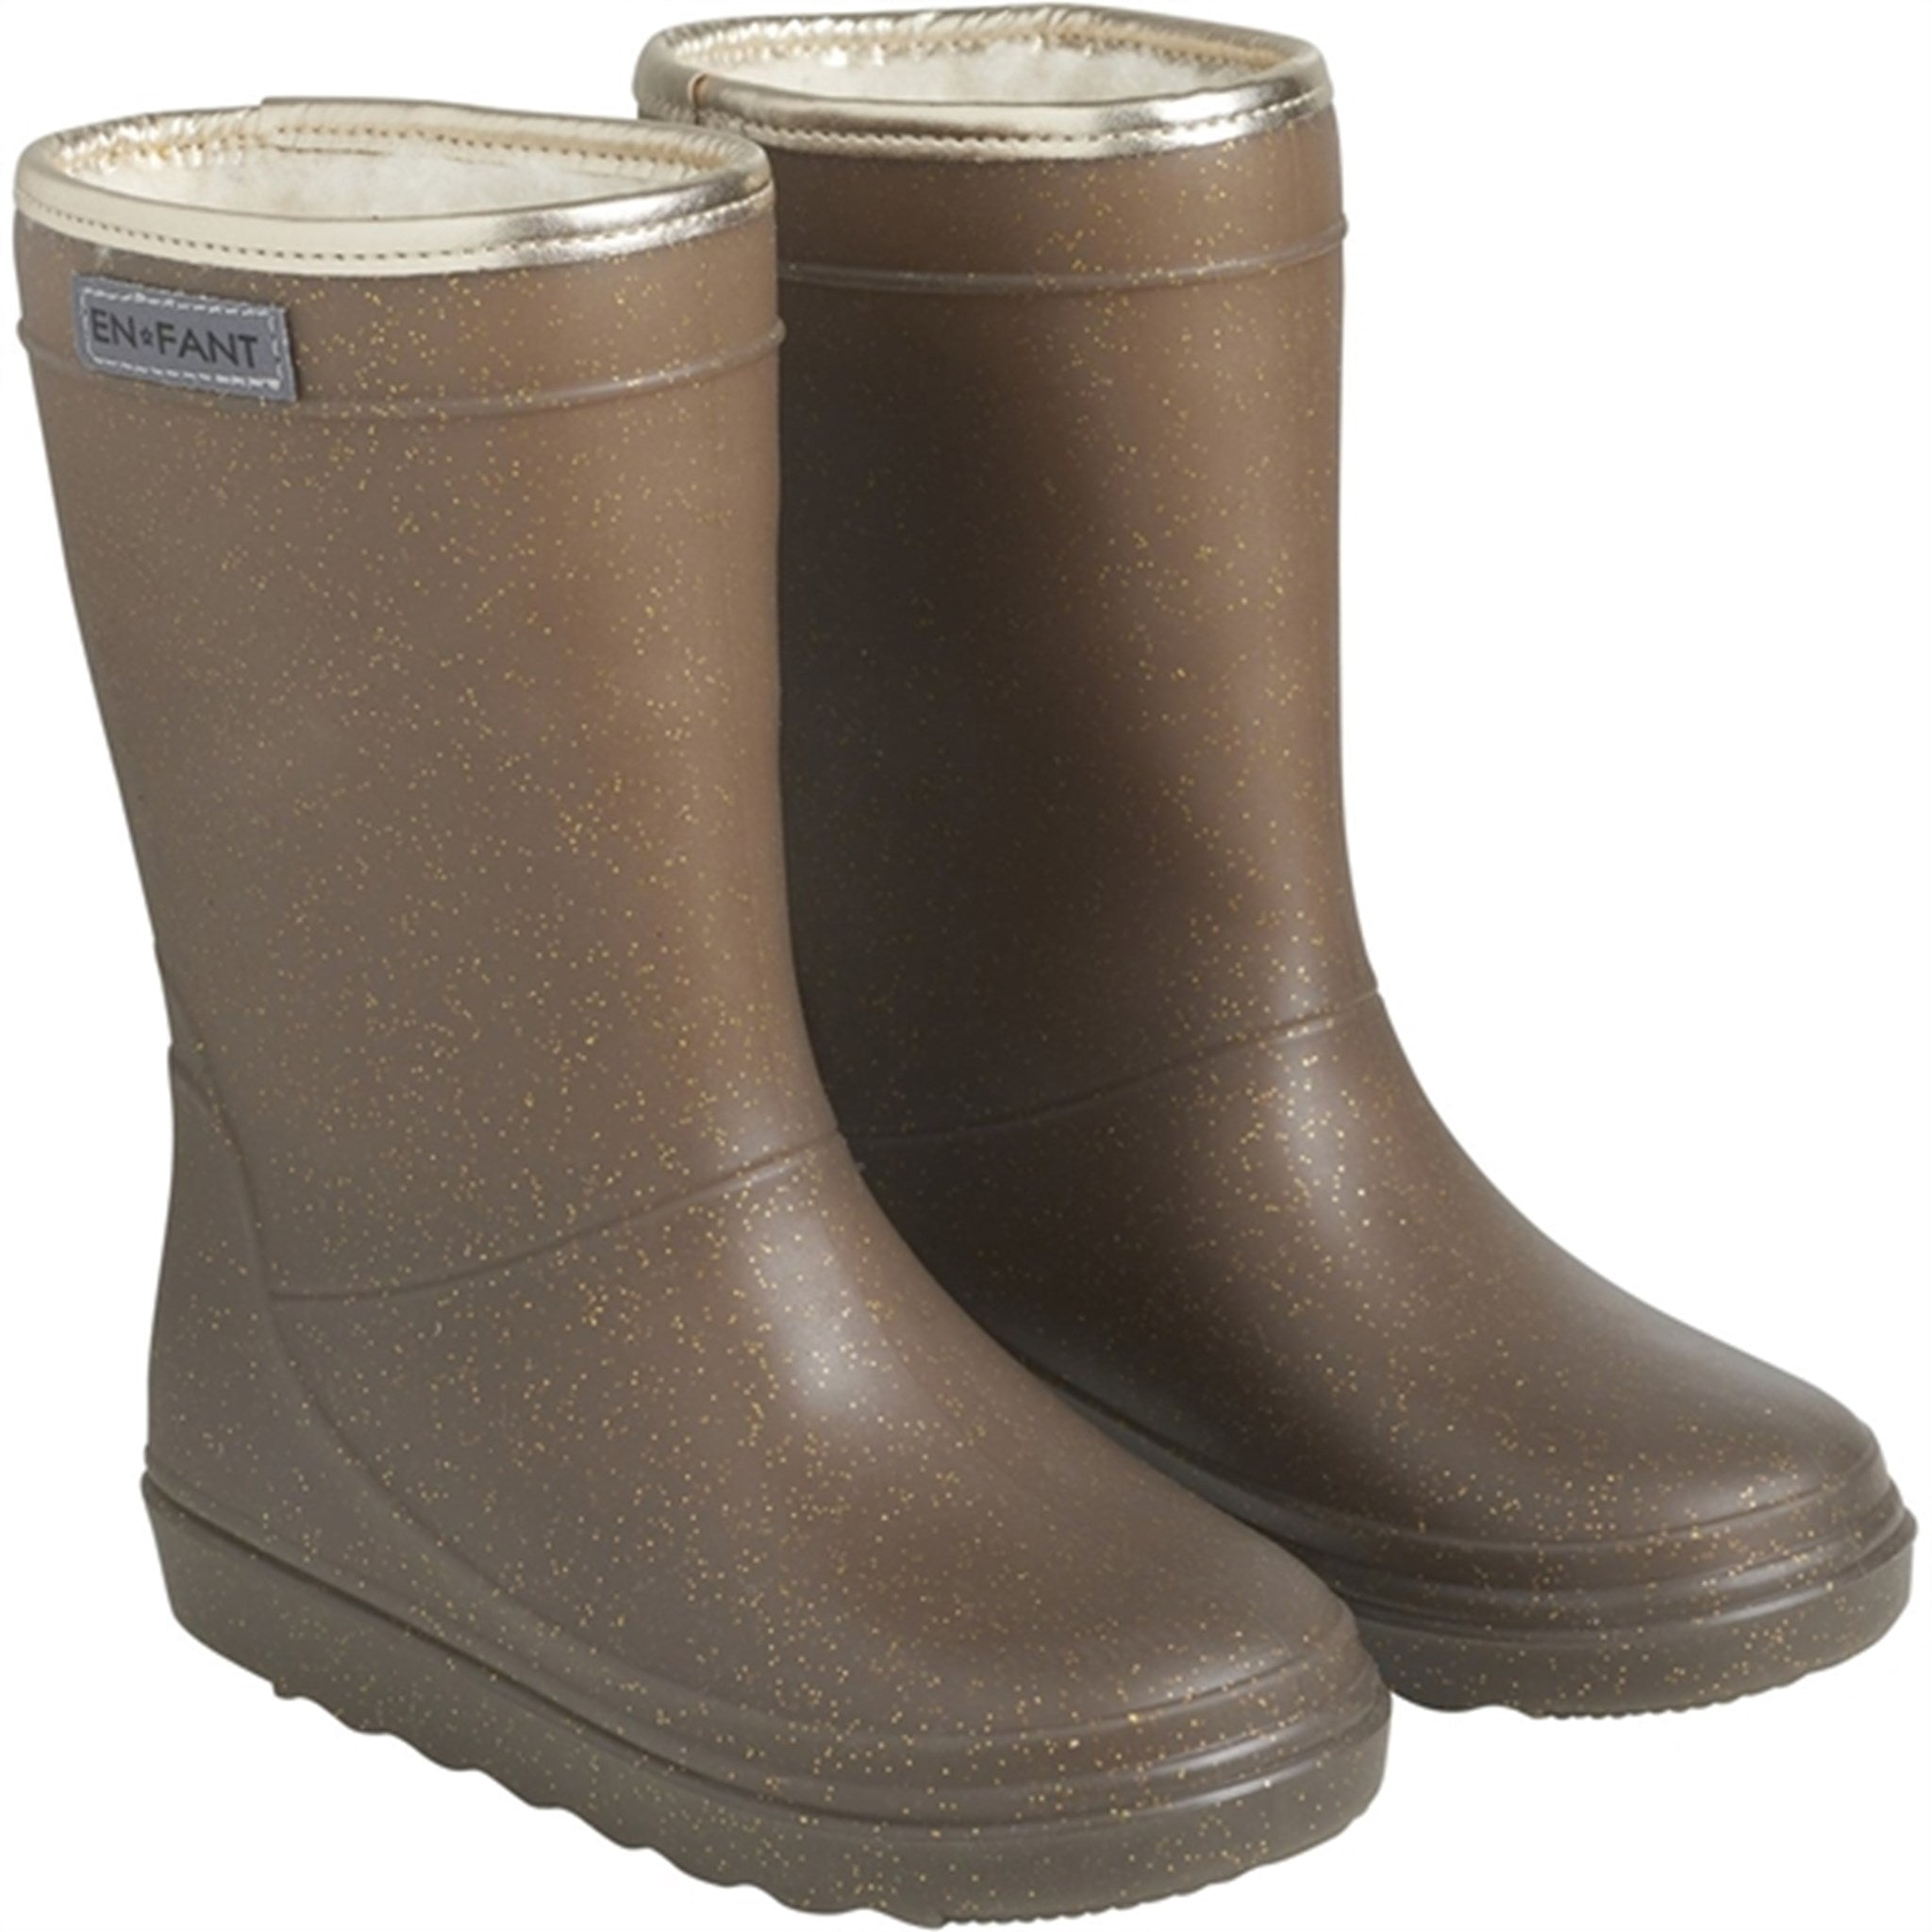 En Fant Thermo Boots Glitter Chocolate Chip